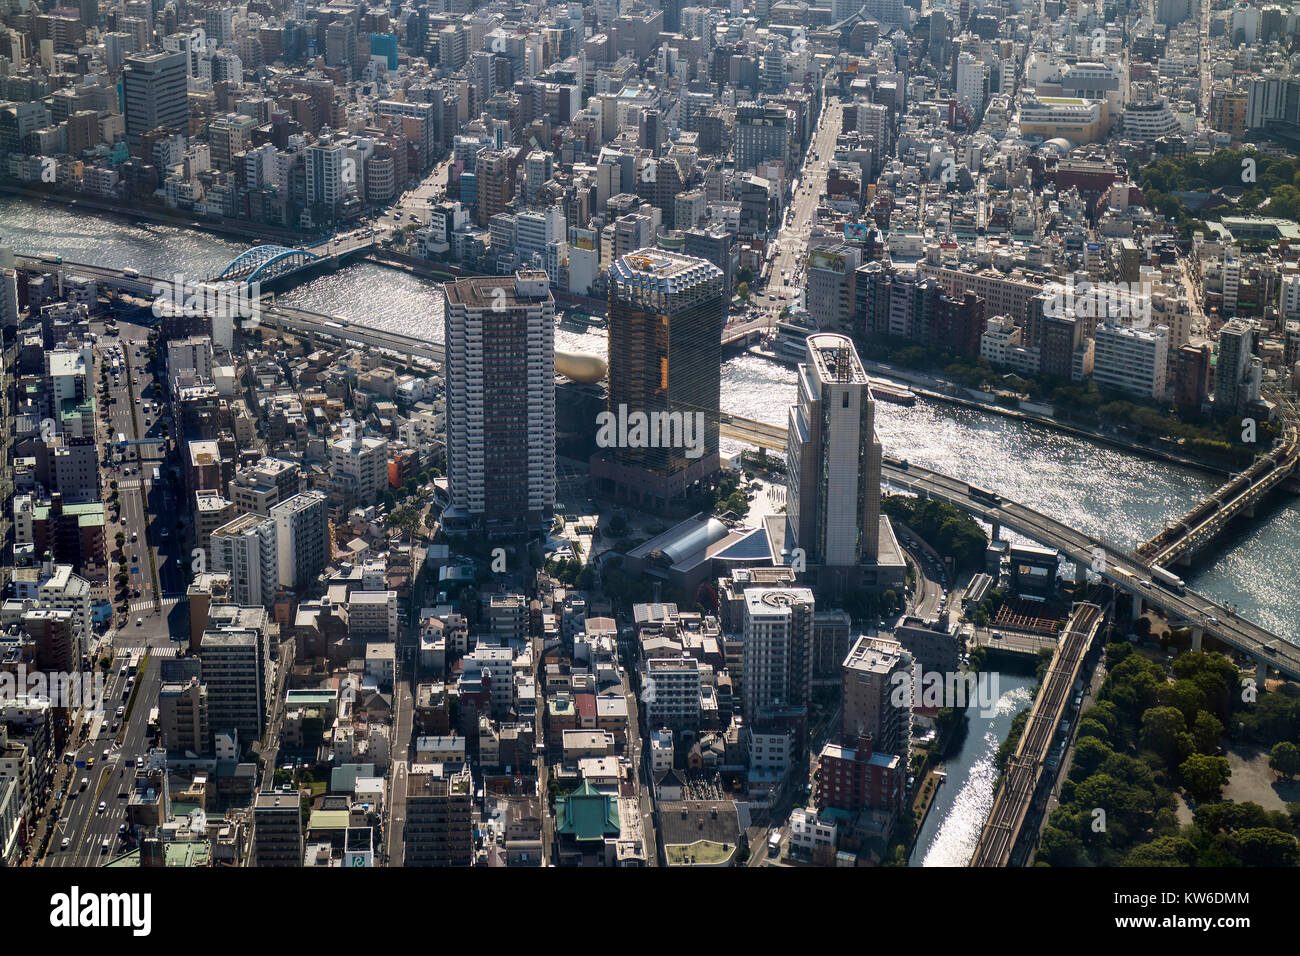 Tokyo -  Japan, June 19, 2017: Aerial view of Tokyo and the Asahi beer tower at the east bank of the Sumida River in Sumida, Tokyo Stock Photo